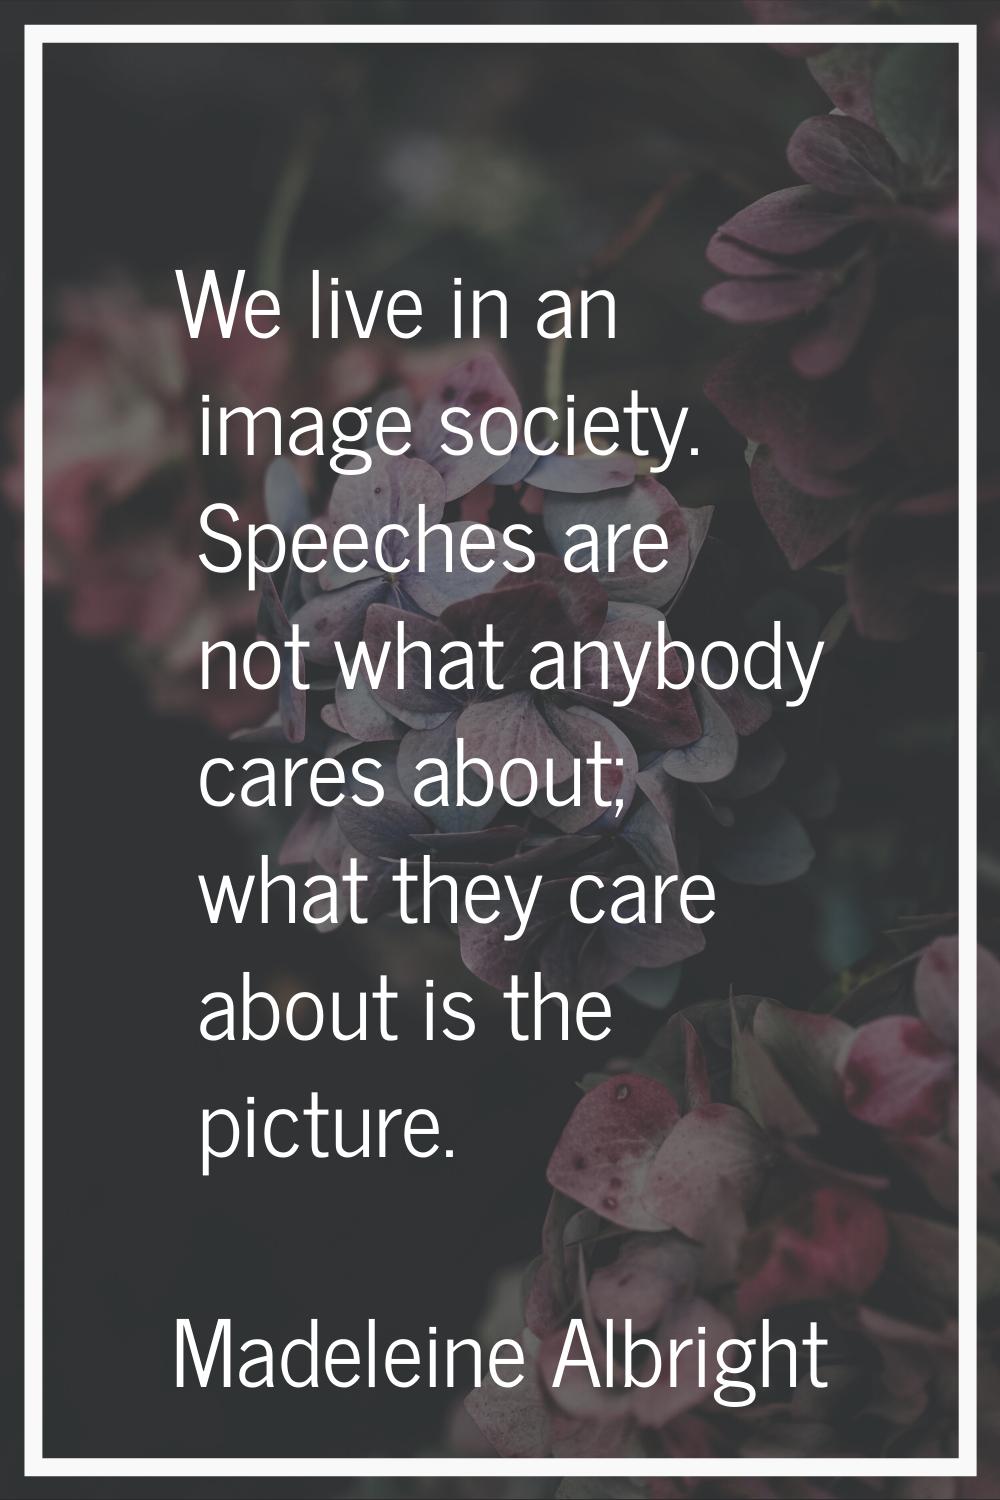 We live in an image society. Speeches are not what anybody cares about; what they care about is the